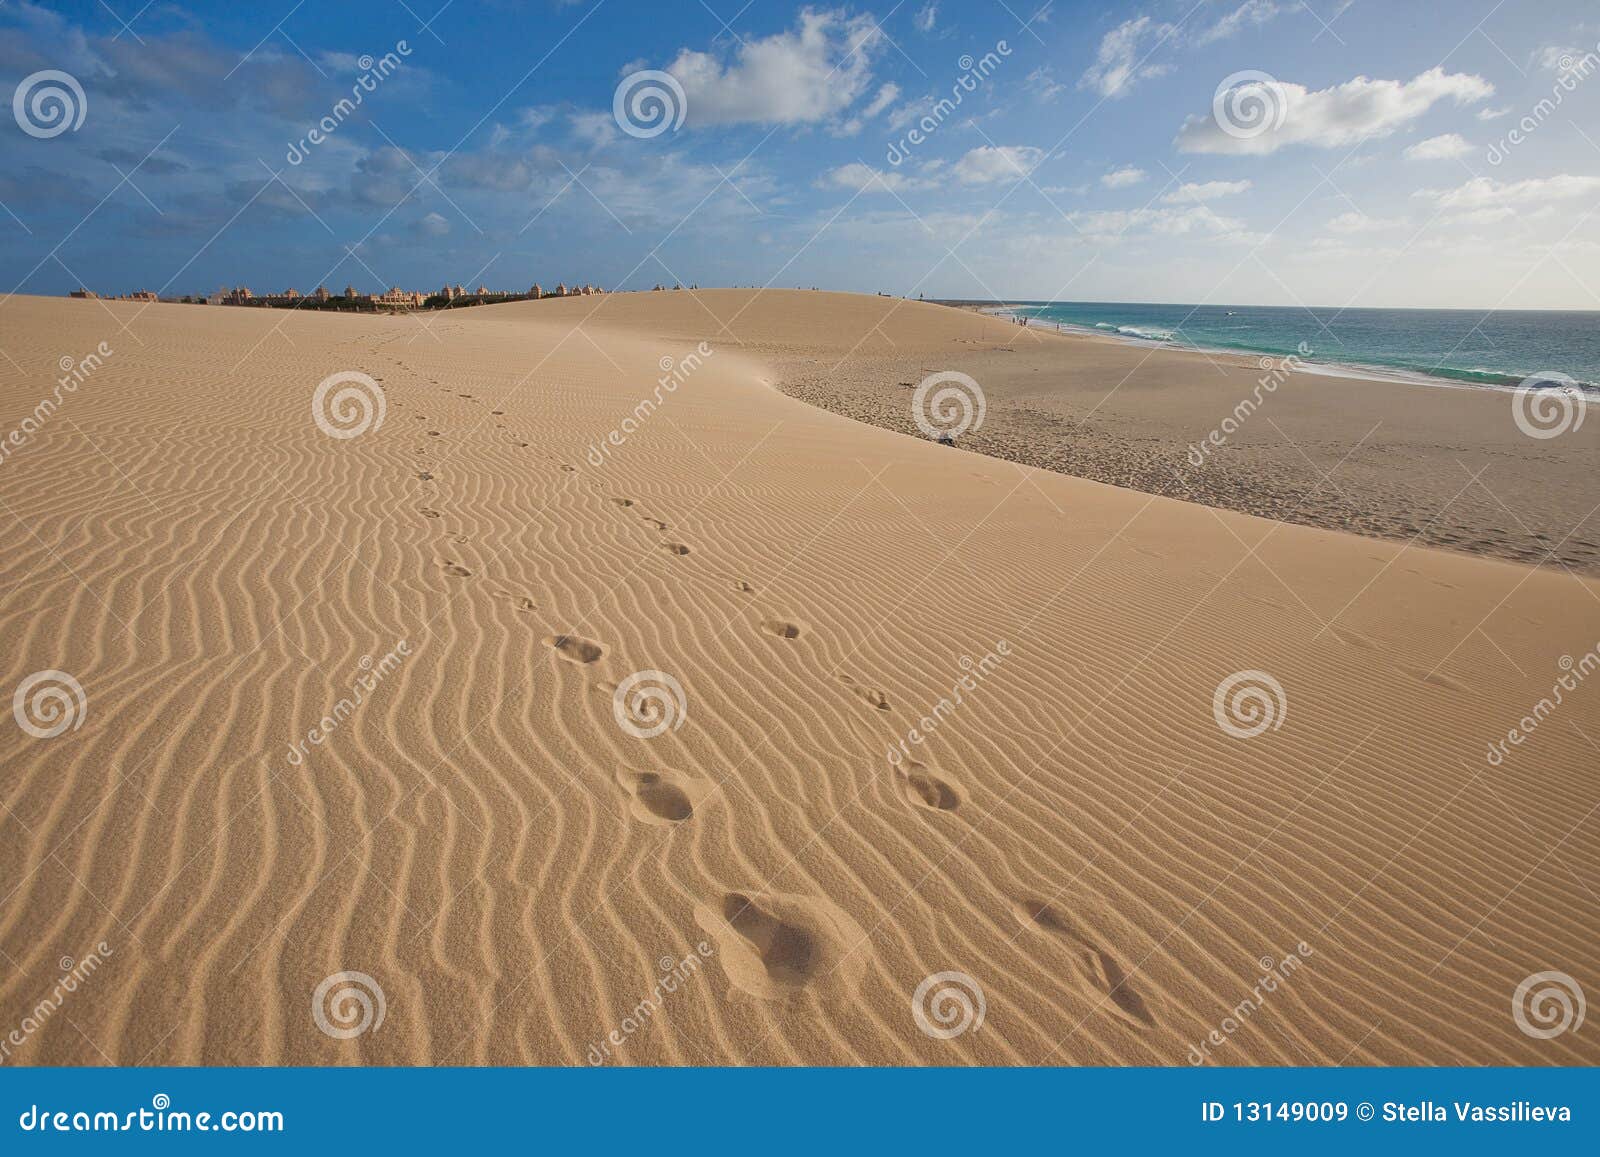 Sand Dunes Near The Ocean Royalty Free Stock Images ...